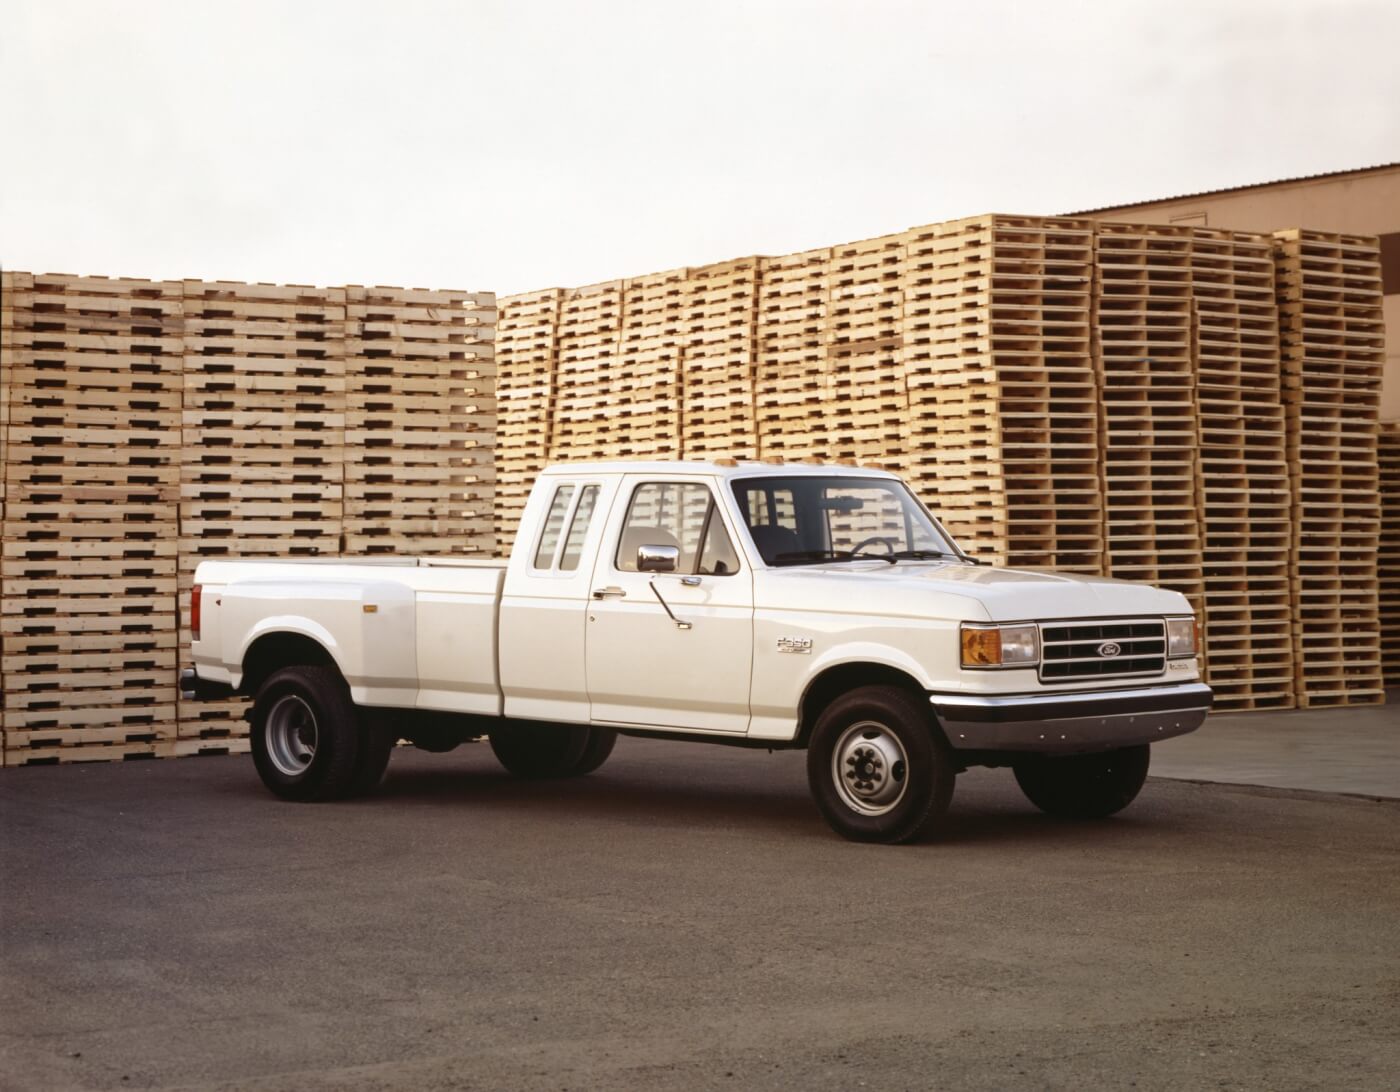 In 1990 you could get a diesel-powered SuperCab F-350 XLT Lariat dually with all the goodies, although this one is in a plain white wrapper.